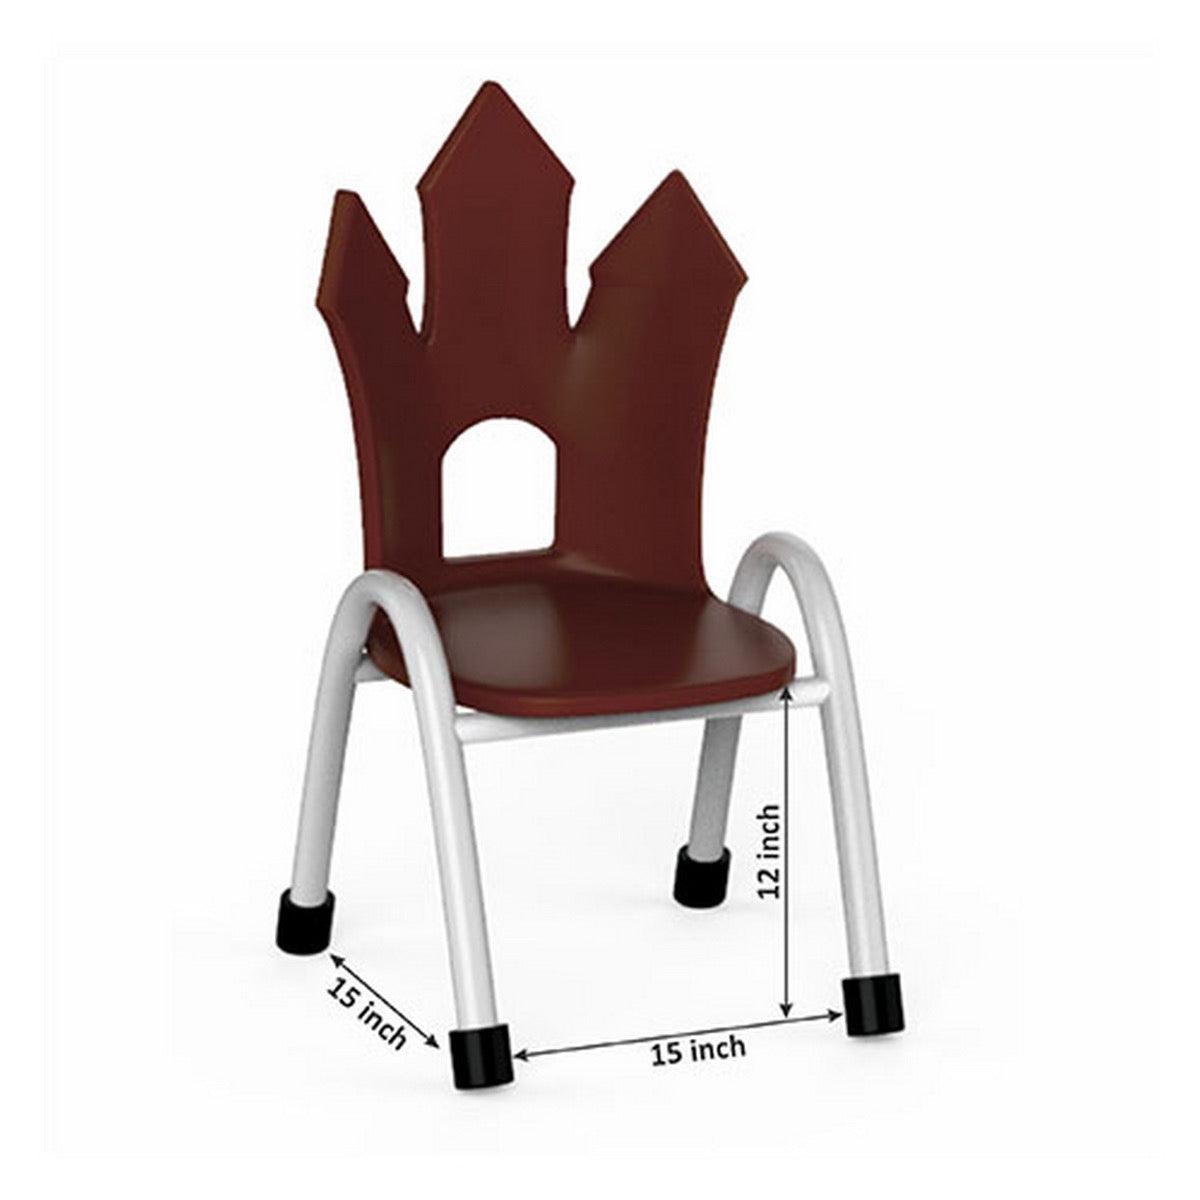 Ok Play Castle Chair, Study Chair, Sturdy And Durable Chair, Plastic Chair, Perfect For Home, Creches And School, Brown, 5 to 10 Years, Height 12 Inches